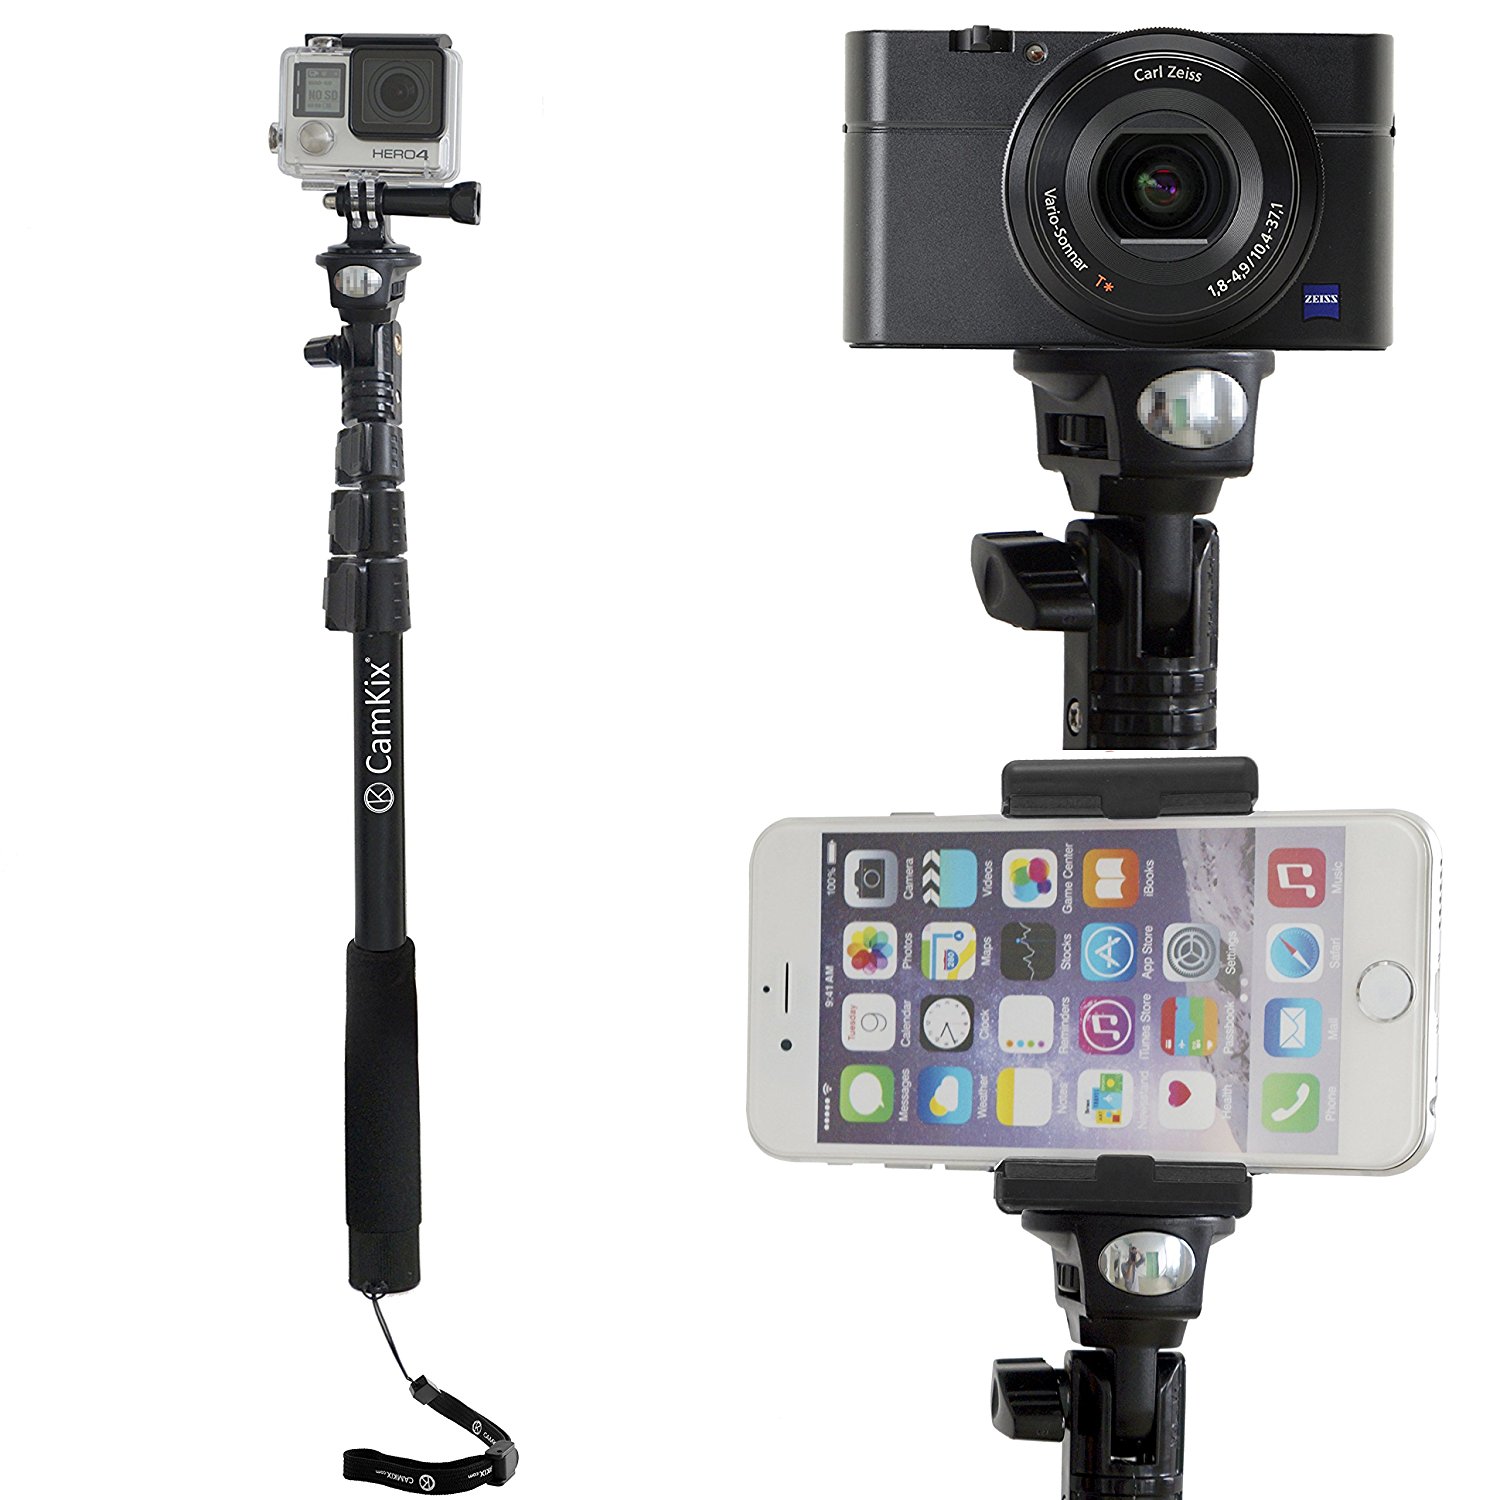 camkix premium telescopic pole 16 - 47 - for gopro hero 5 / 4, session, black, silver, hero+ lcd, 3+, 3, 2, 1, and compact cameras; and cell phones - with cradle for remote - strong and stable clip lo - image 4 of 8